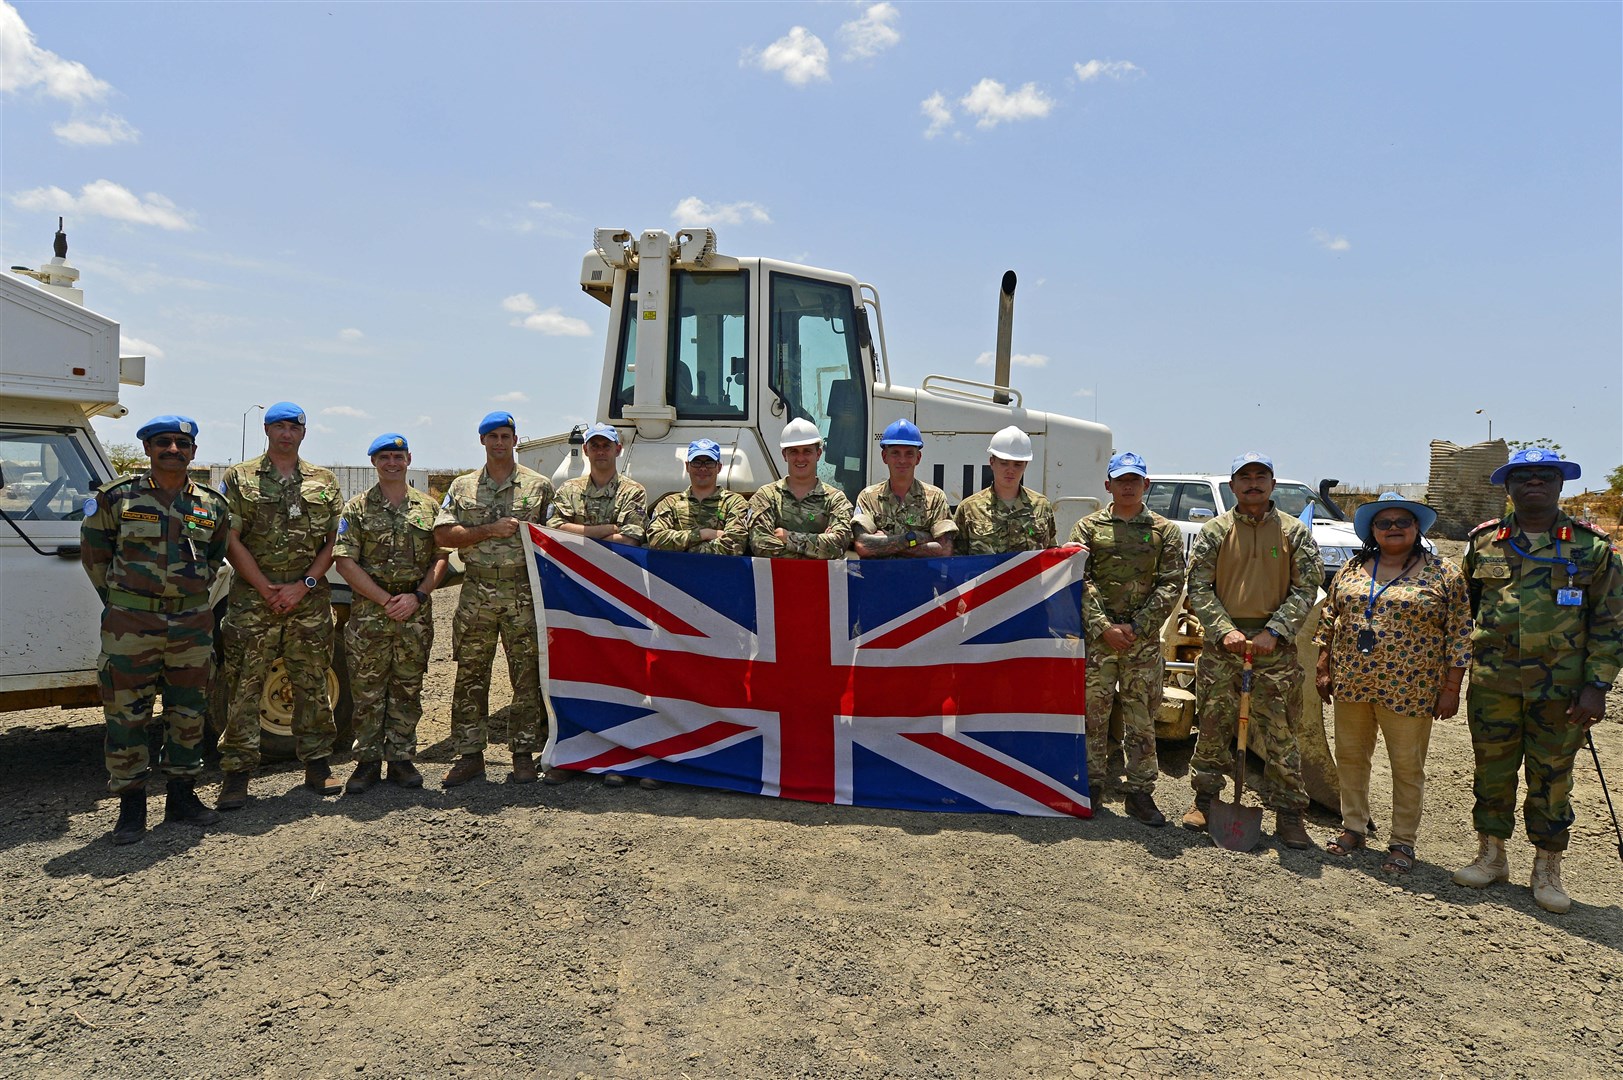 The Royal Engineers in South Sudan